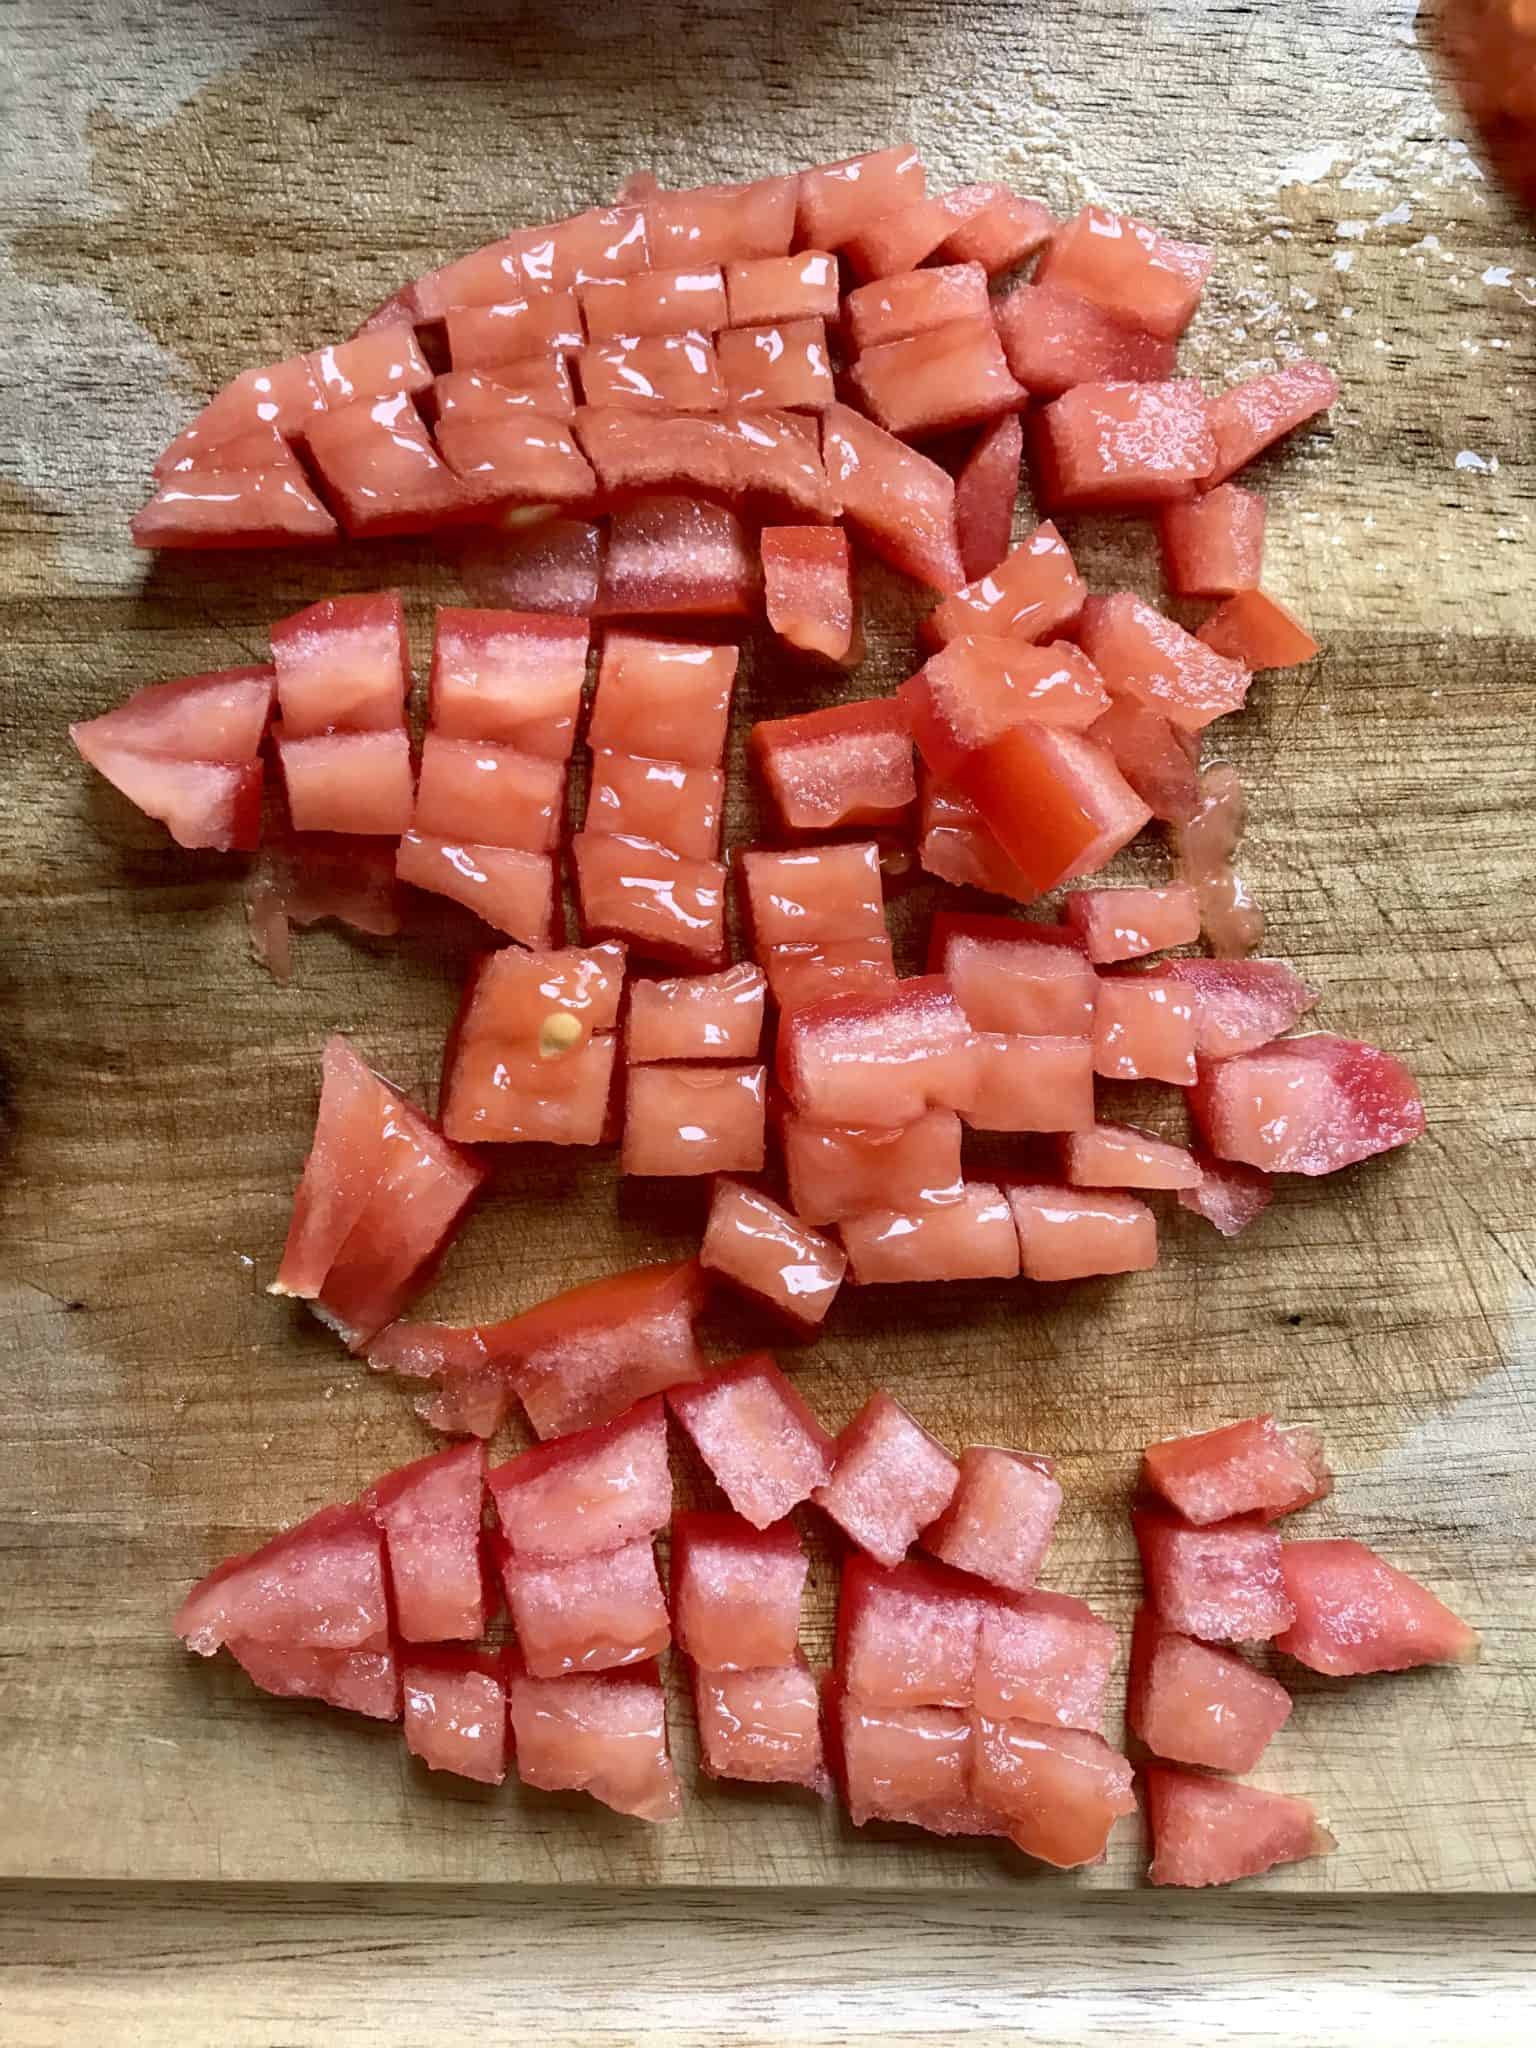 Diced tomato on wooden cutting board